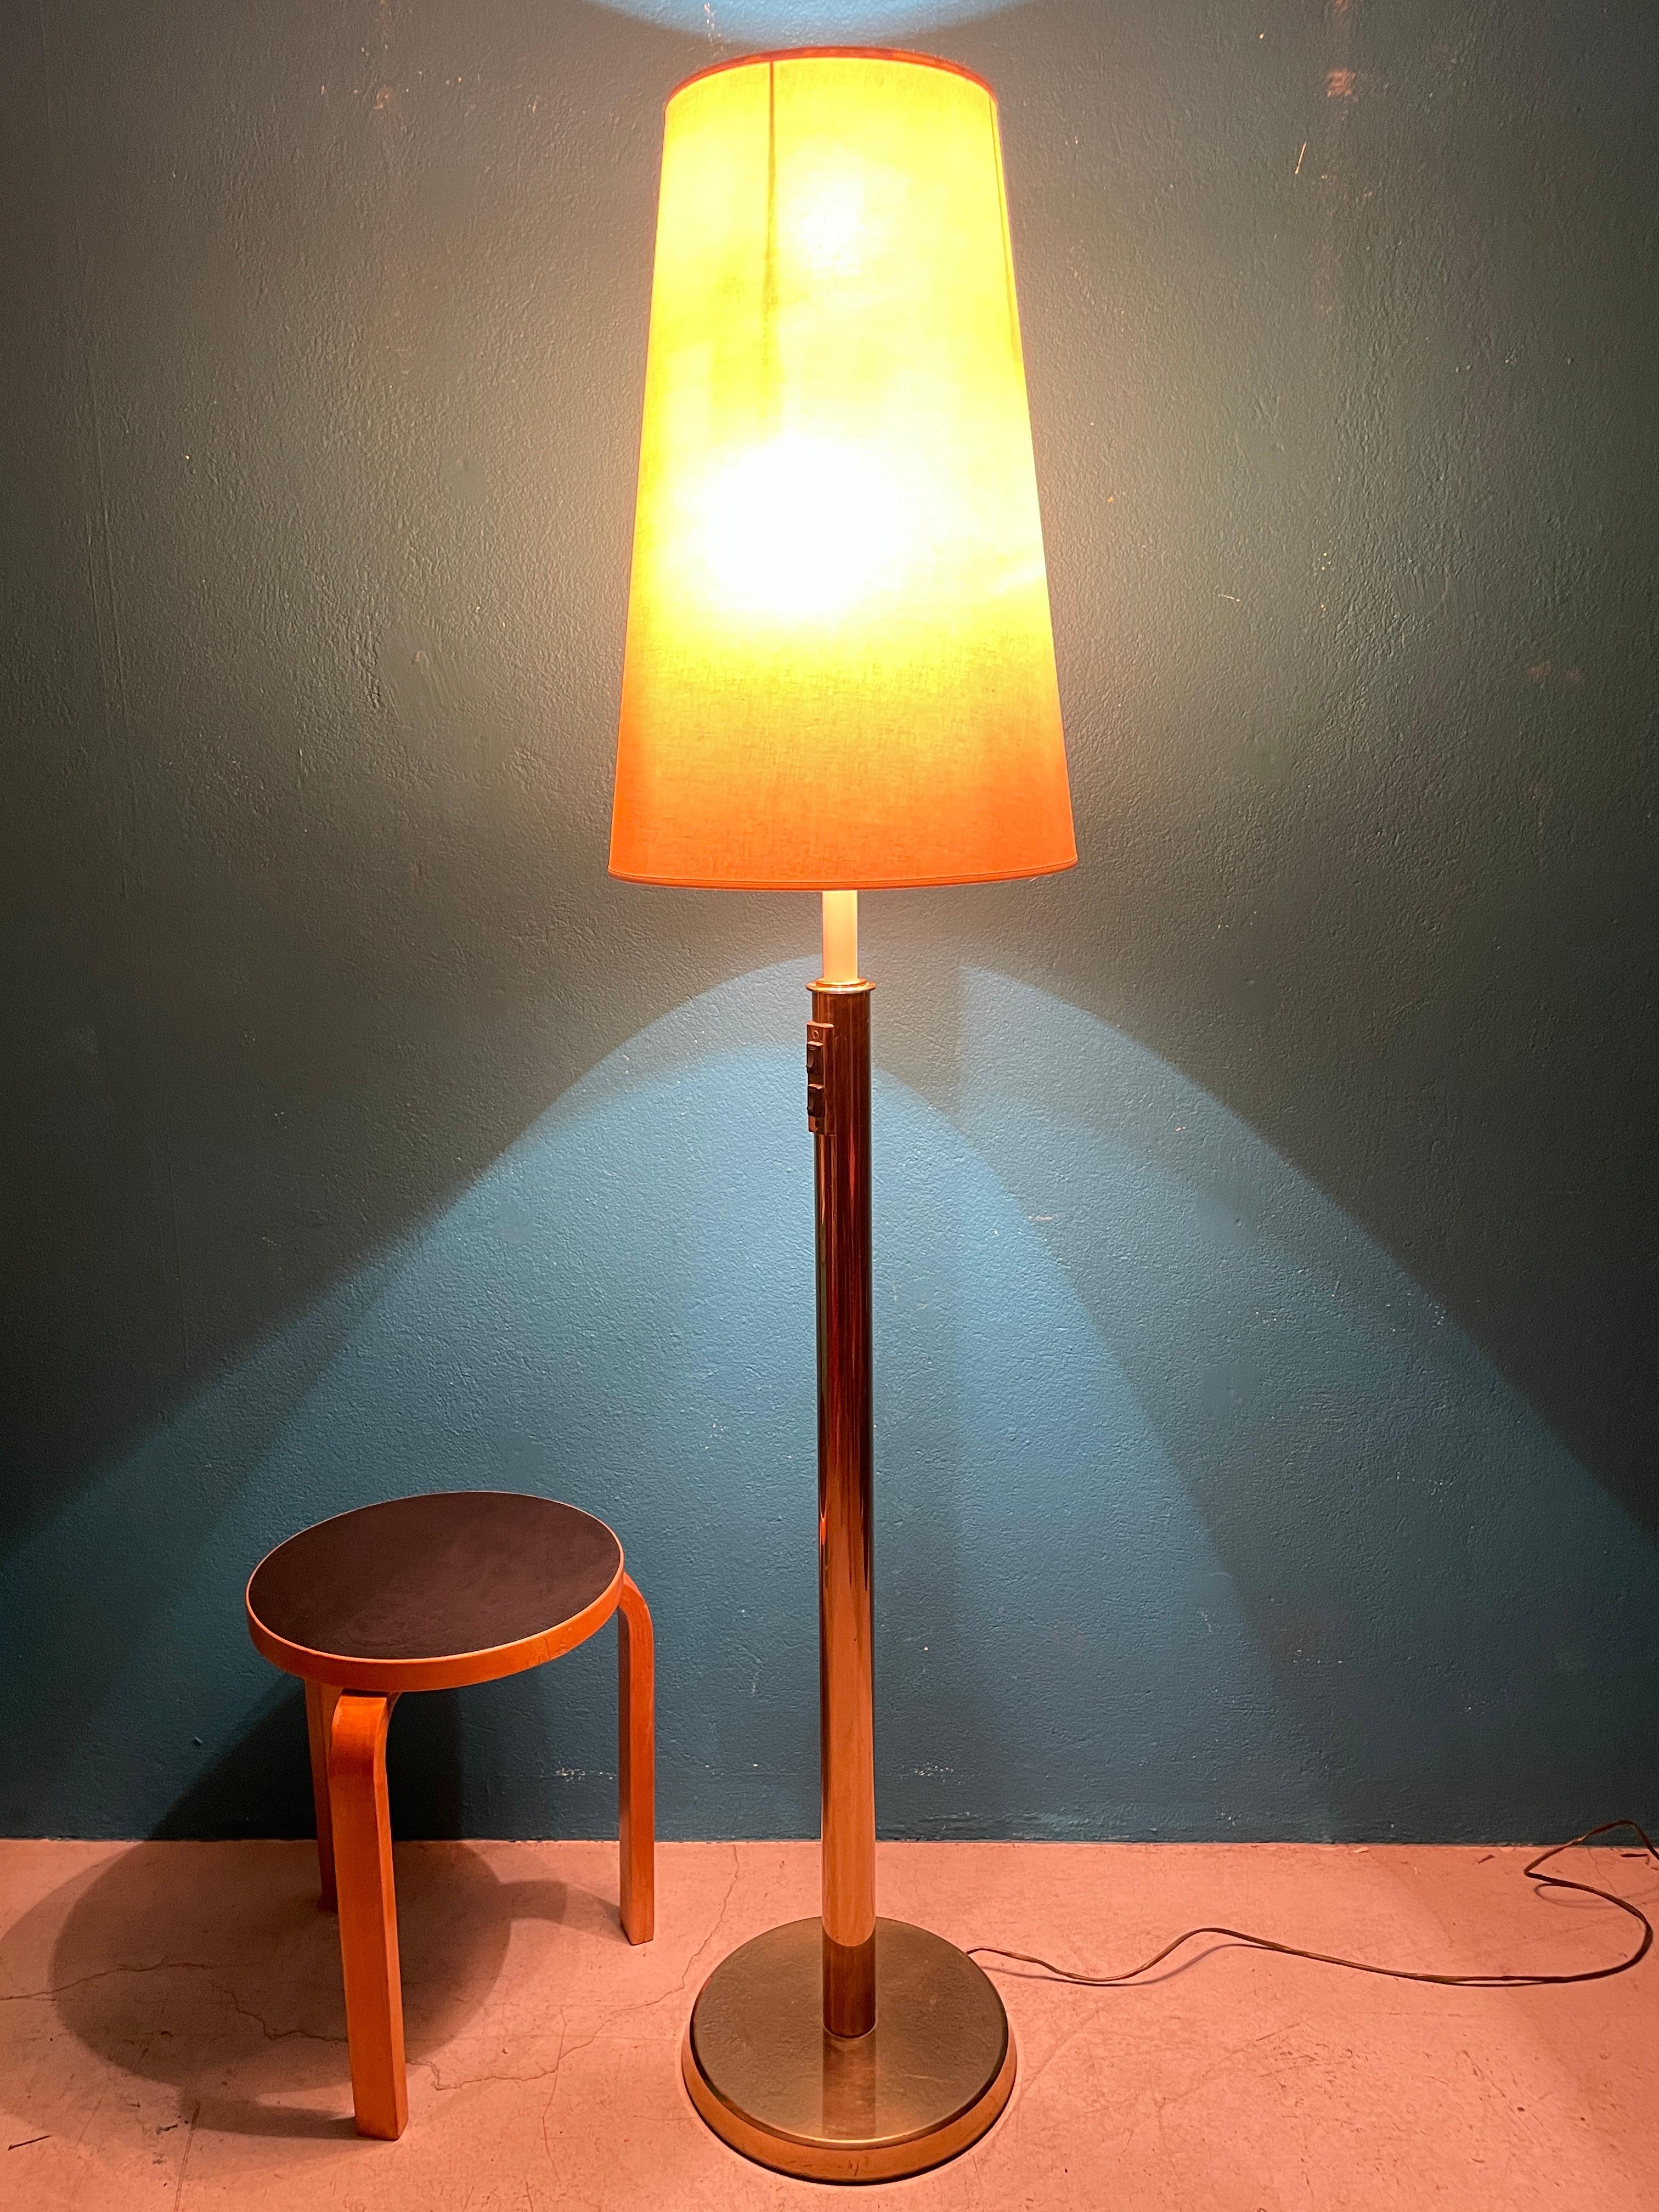 Big and massive floor lamp which has four light spots. Three of them are inside the shade part and one bulb lights up. The combination of lights creates a nice light pattern on the wall/roof.

a Showy brass body with big natural white shade of makes